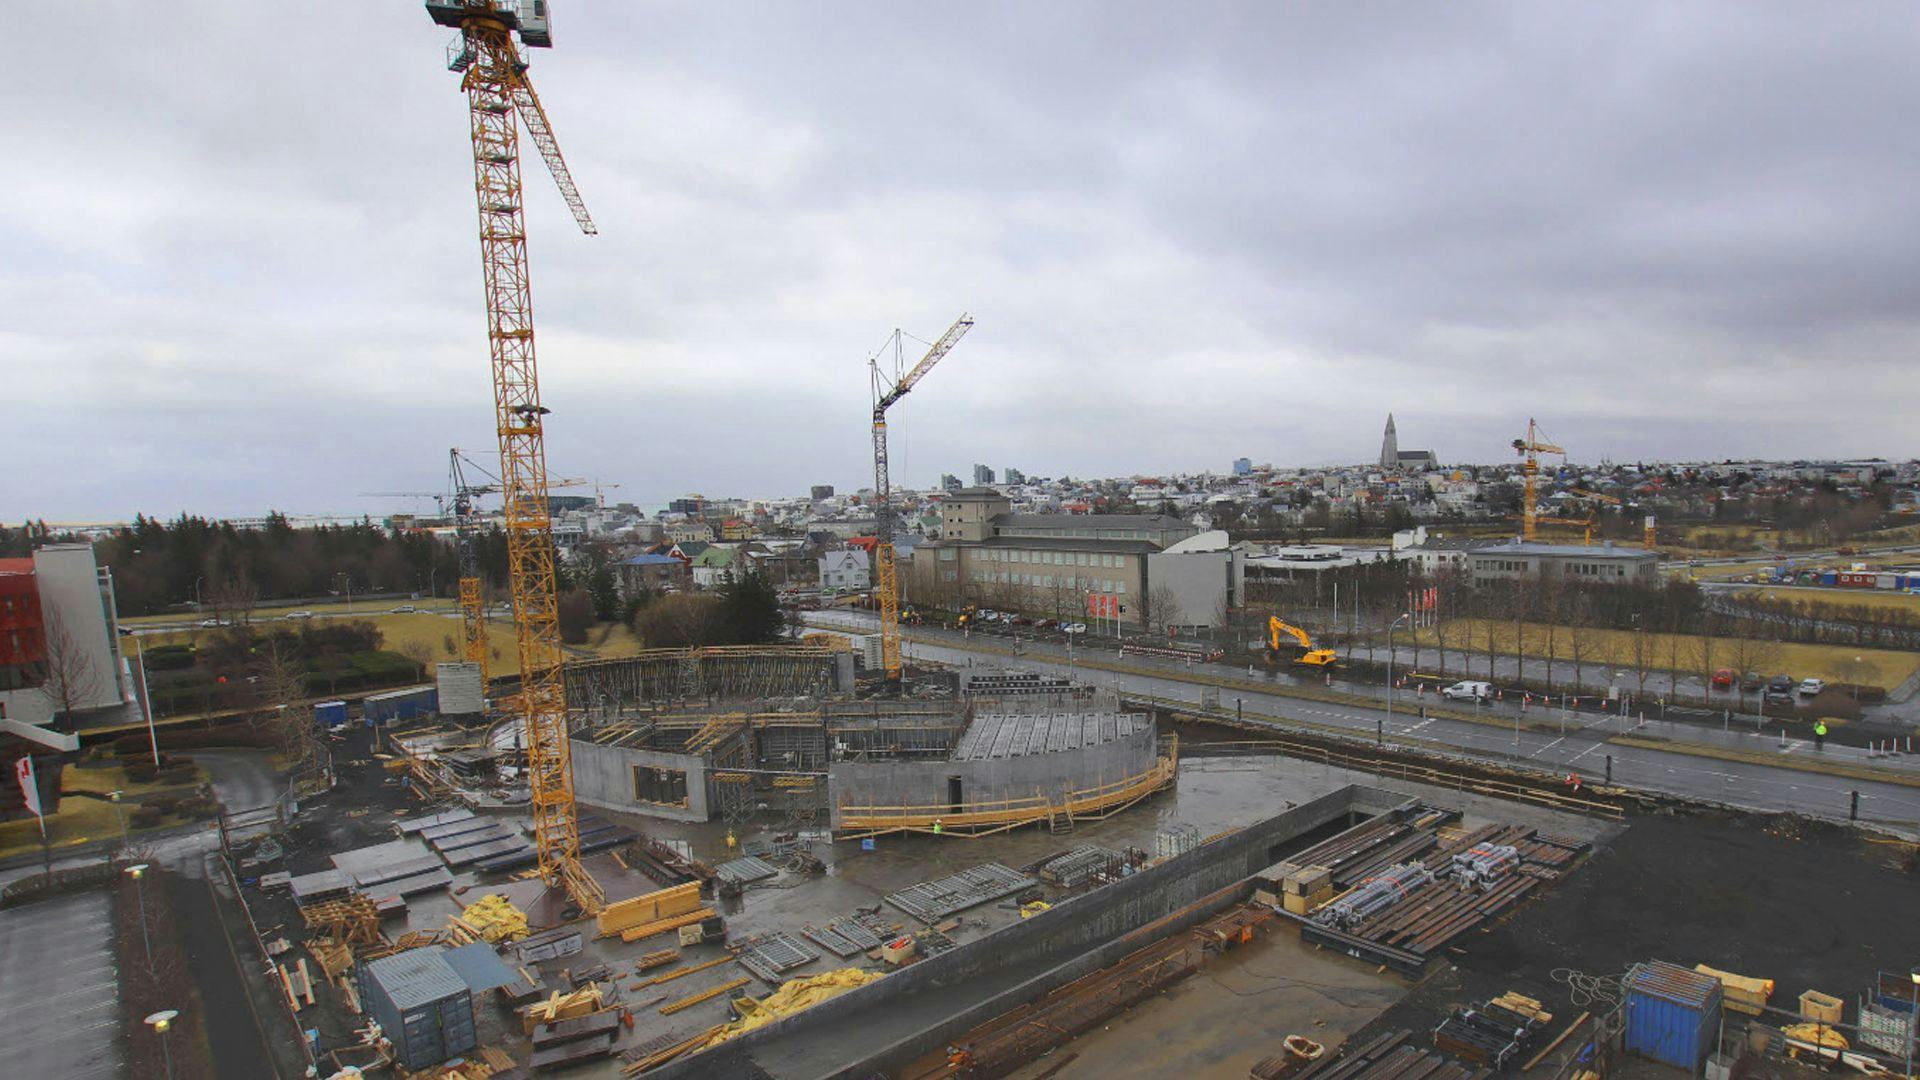 An urban construction site with huge yellow cranes and a cityscape in the distance under overcast skies